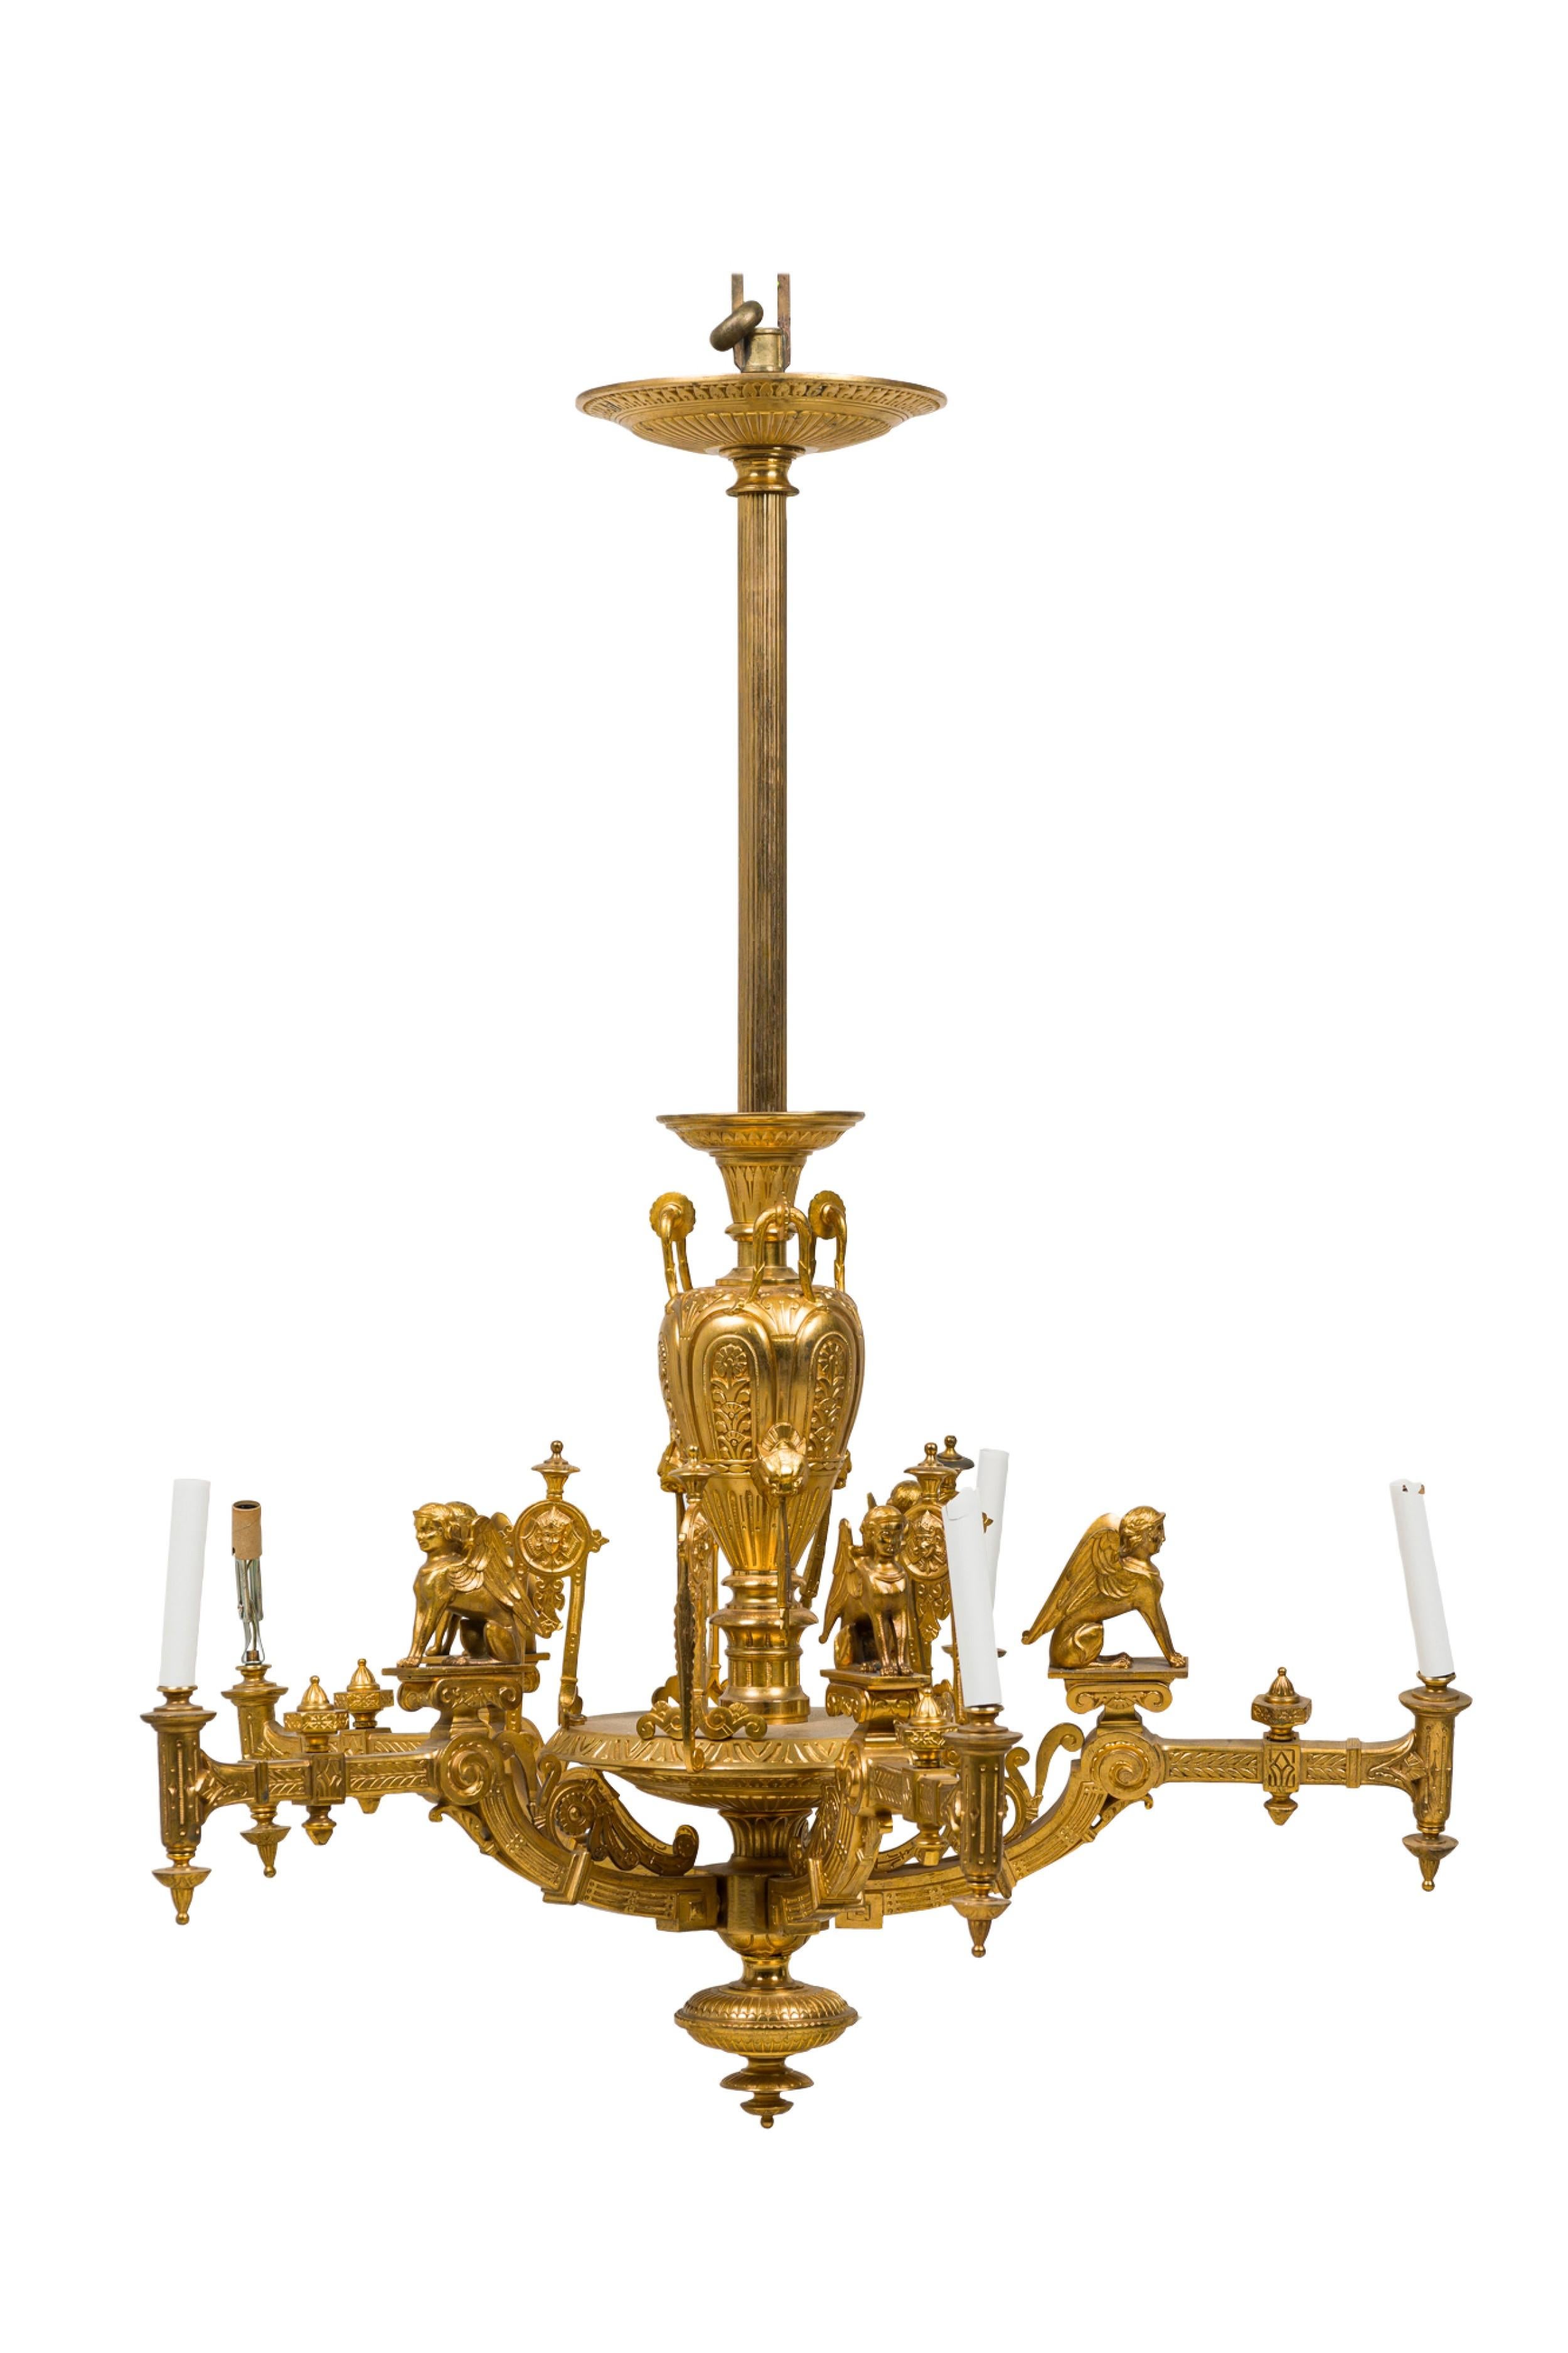 20th Century French Empire Style Gilt Bronze Five-Light Chandelier For Sale